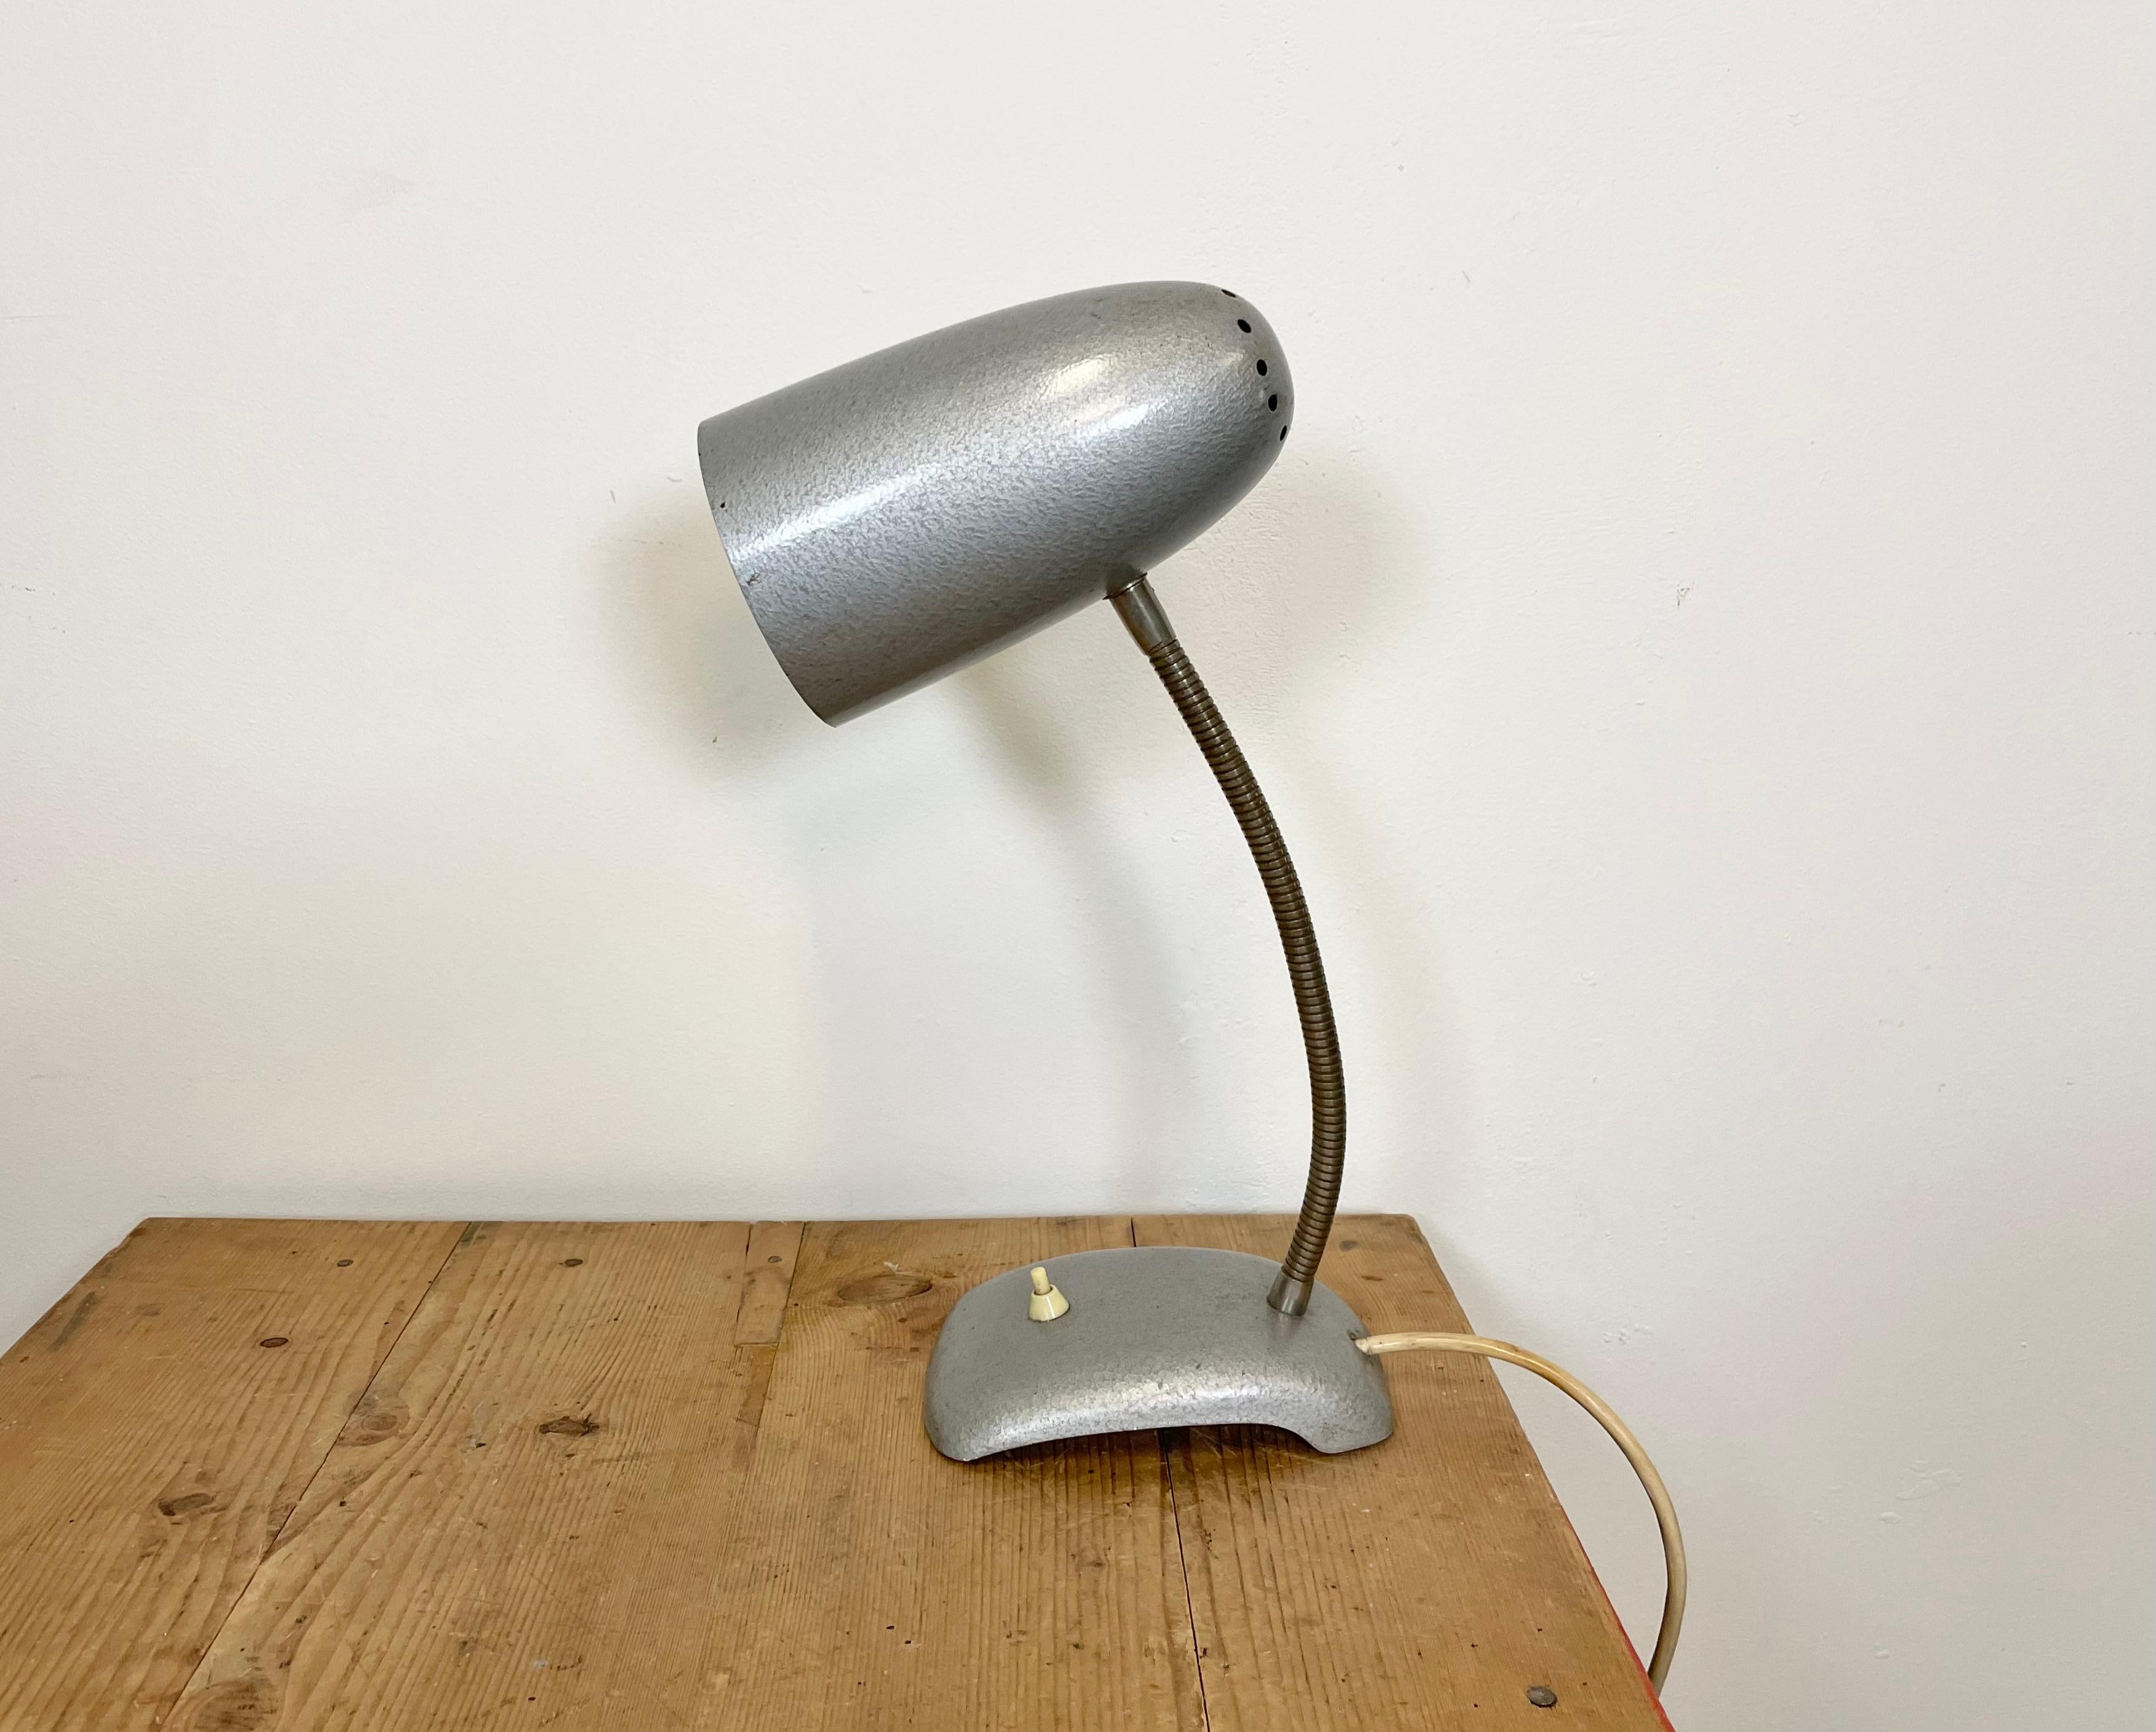 Industrial table lamp made in former Czechoslovakia during the 1960s. It features a grey hammer paint body and a chrome plated gooseneck. The socket requires E 27 light bulbs. Very good vintage condition. The lampshade diameter is 11 cm.